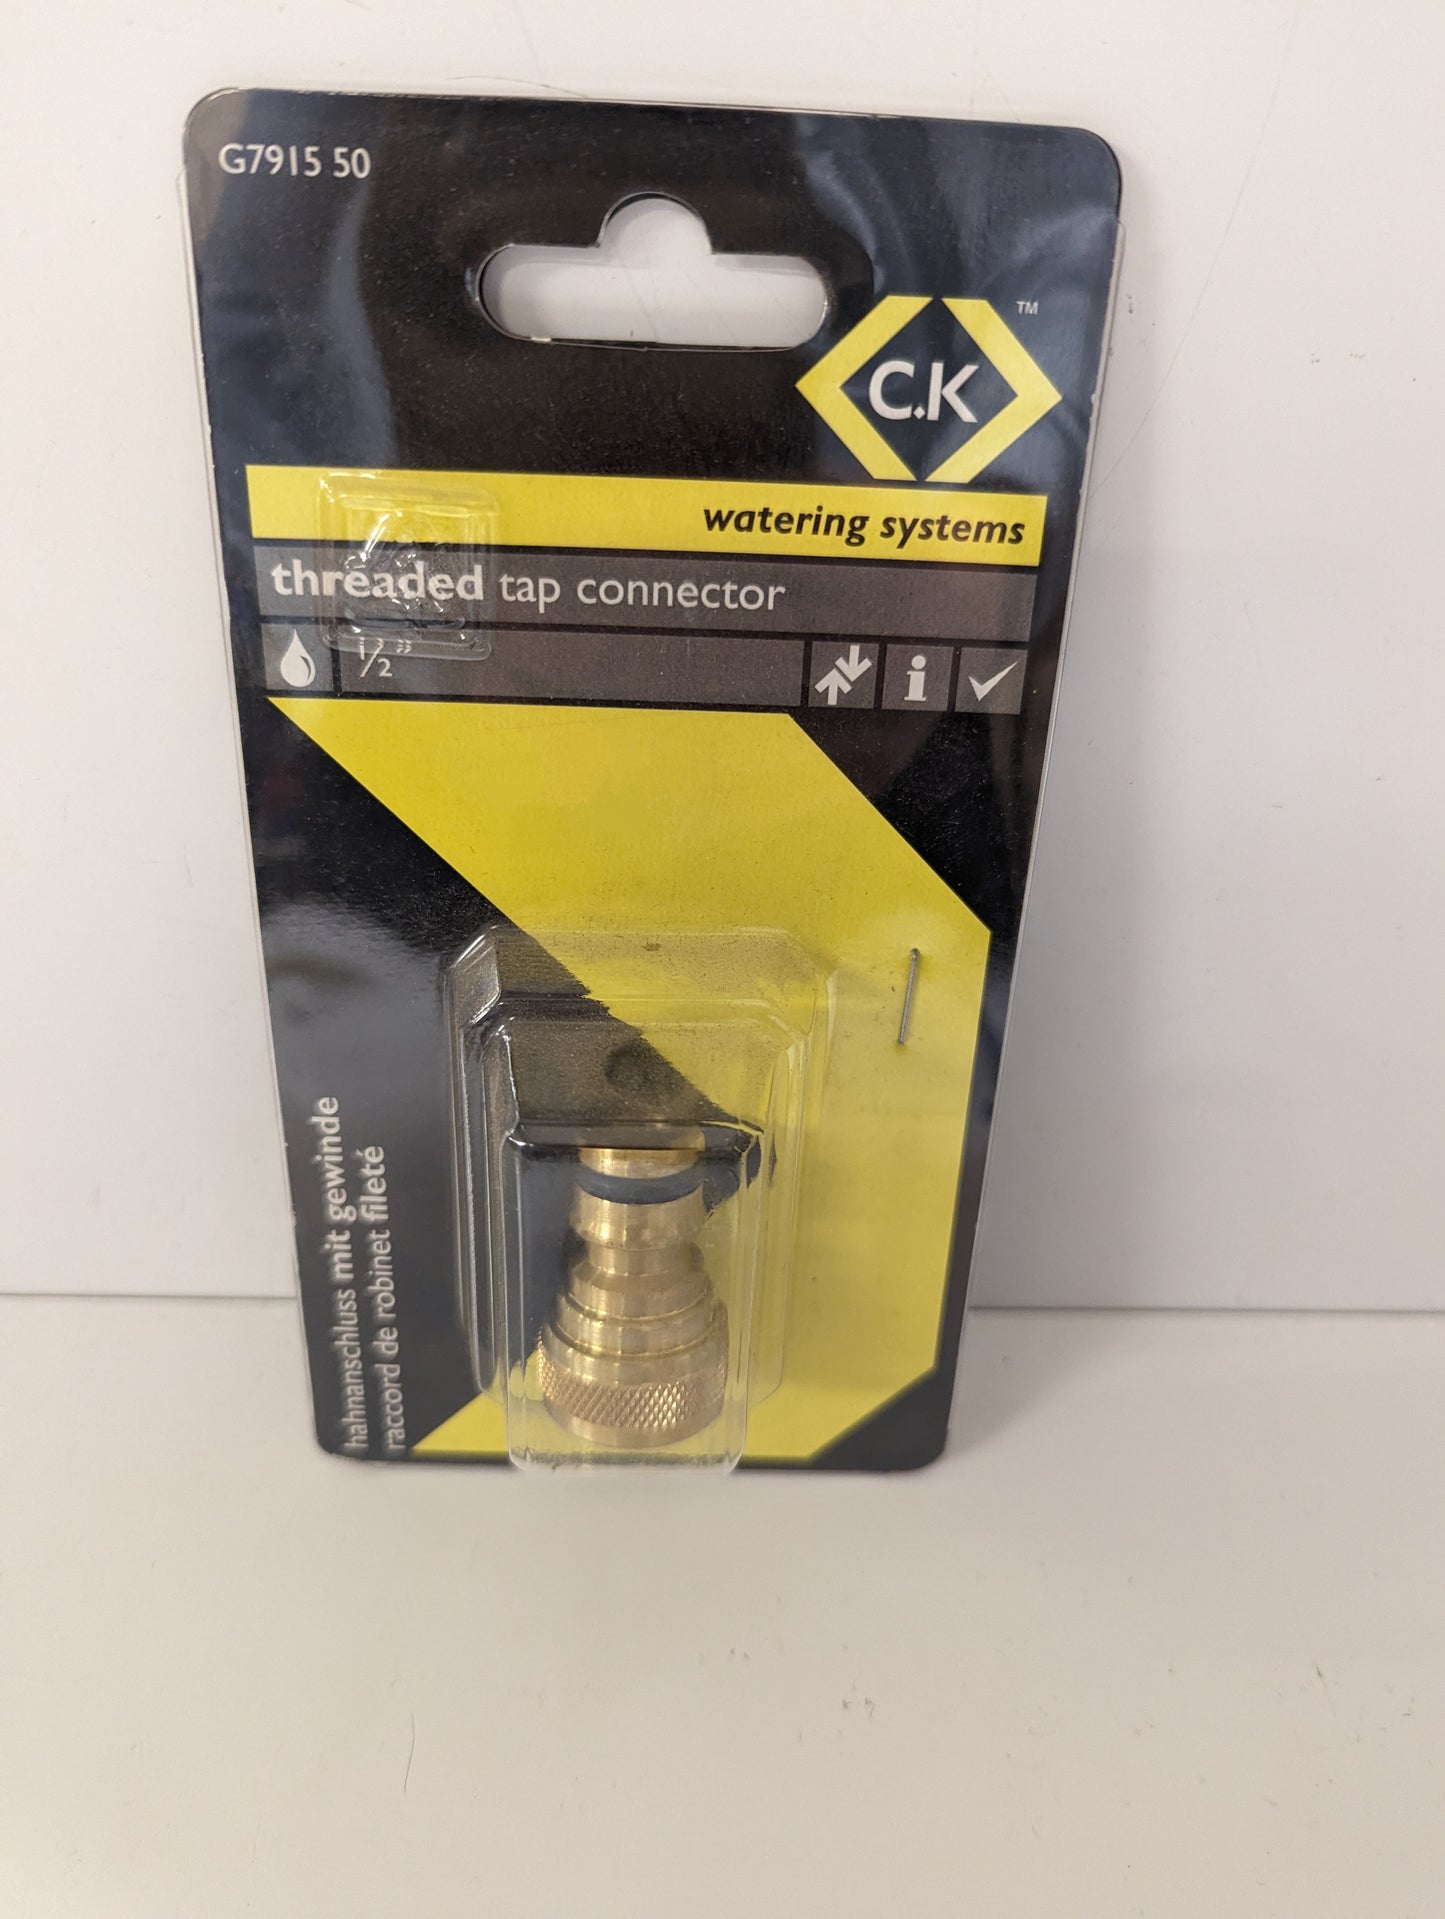 CK watering Systems Threaded tap connector